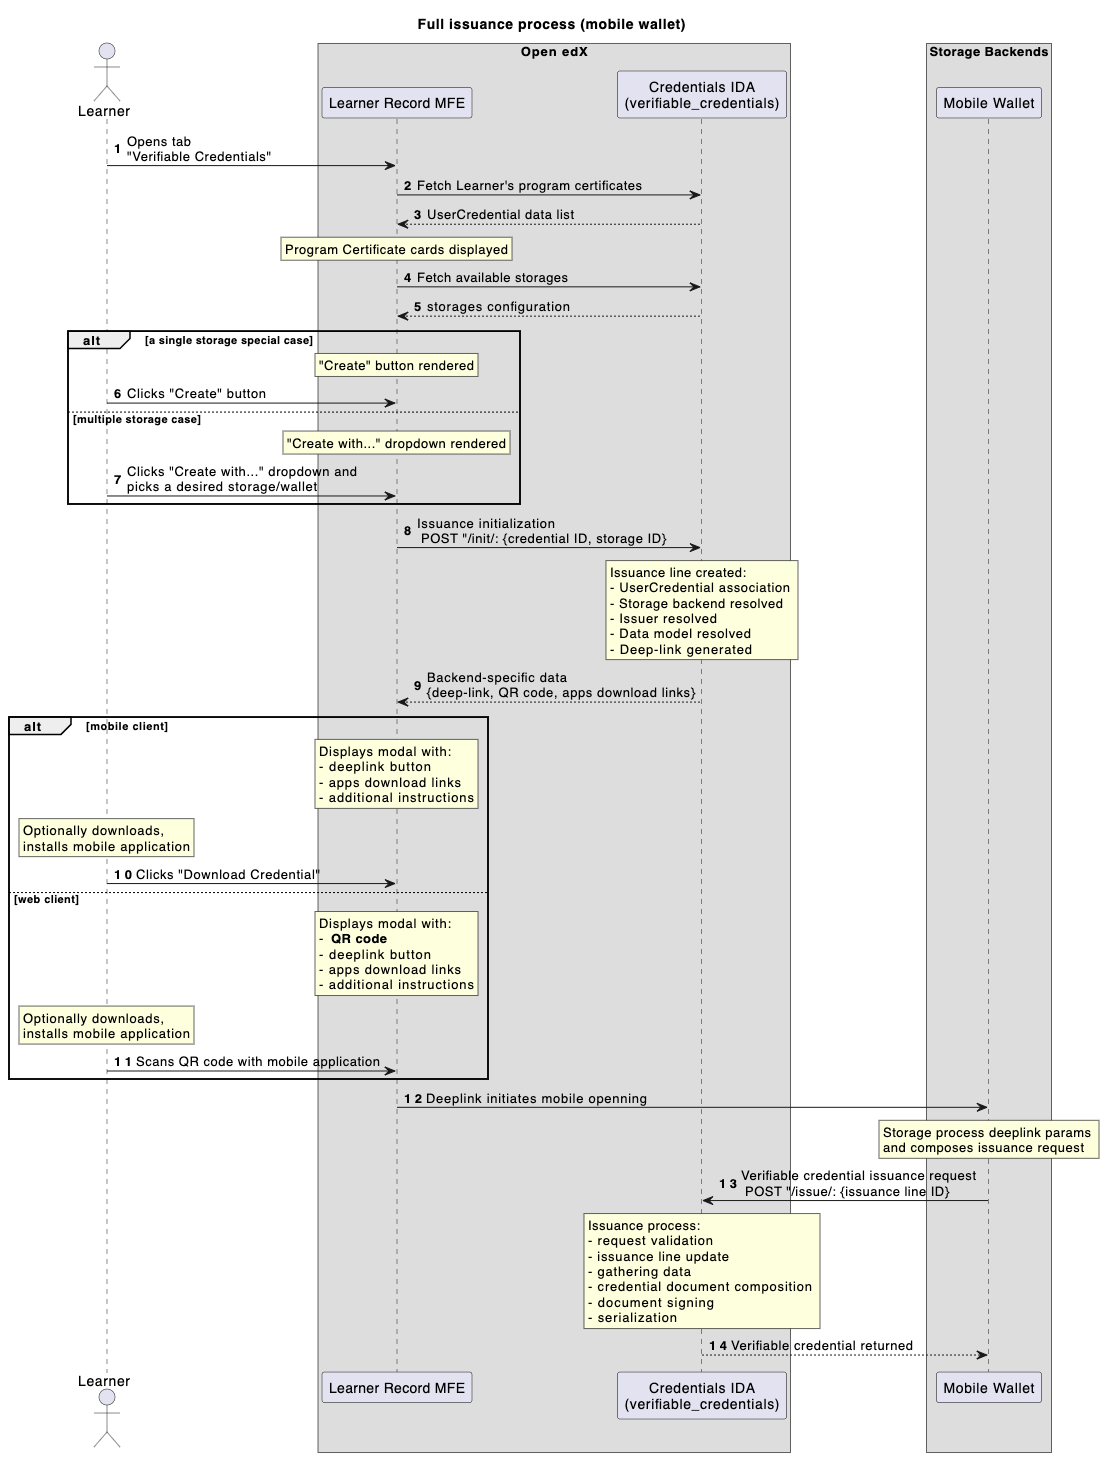 Verifiable Credentials issuance sequence diagram